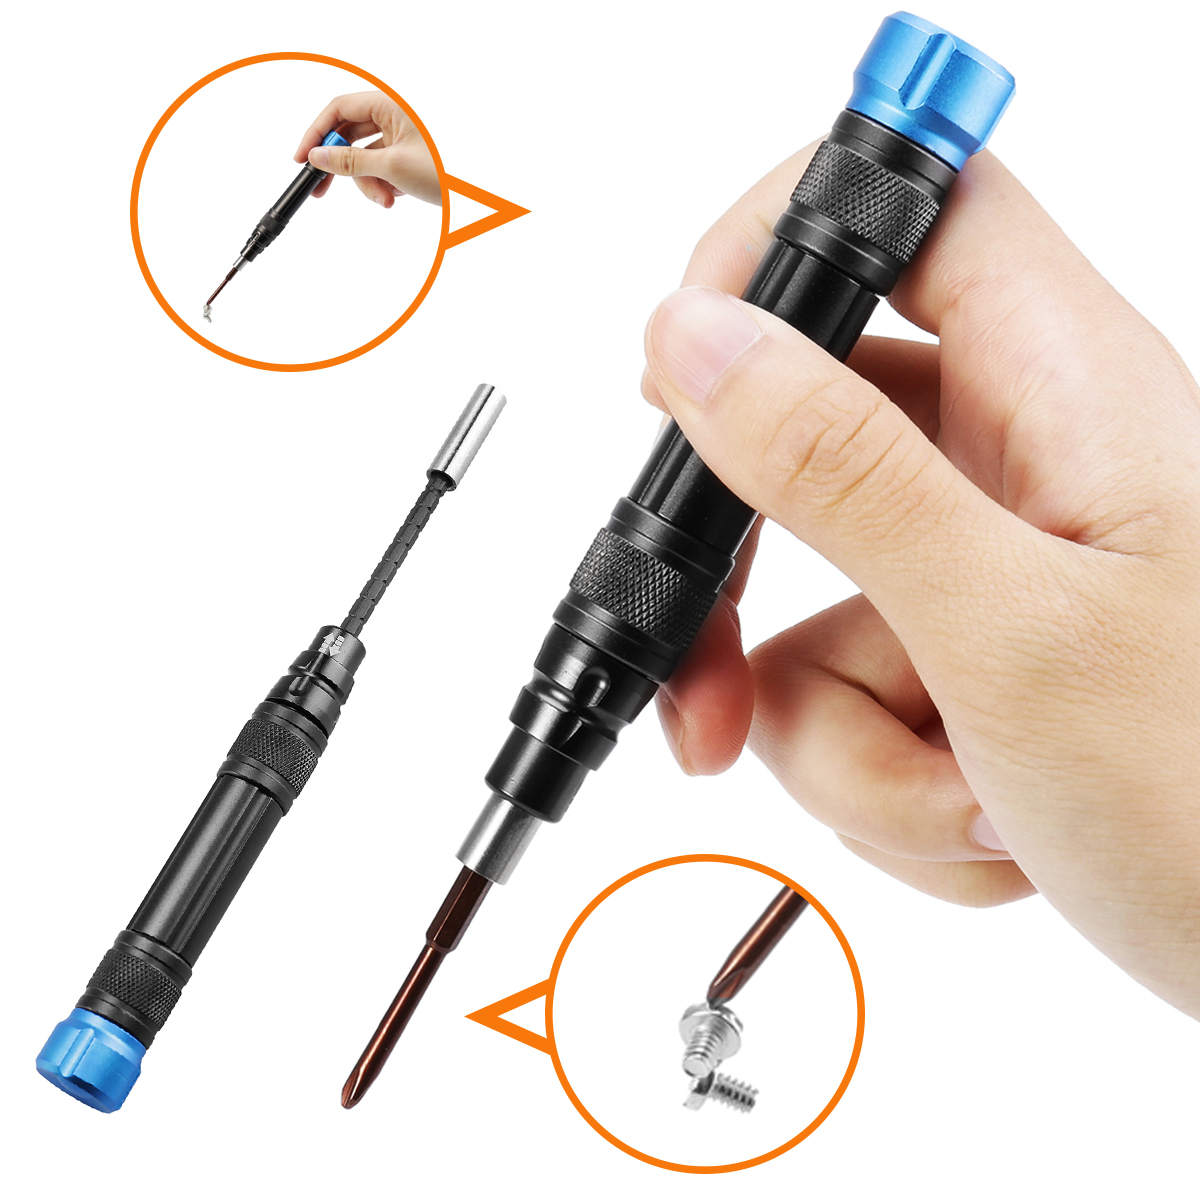 Baban-24-In-1-Precision-Screwdriver-Set-Screwdriver-Combination-For-iPhone-Computer-Notebook-Disasse-1960898-9